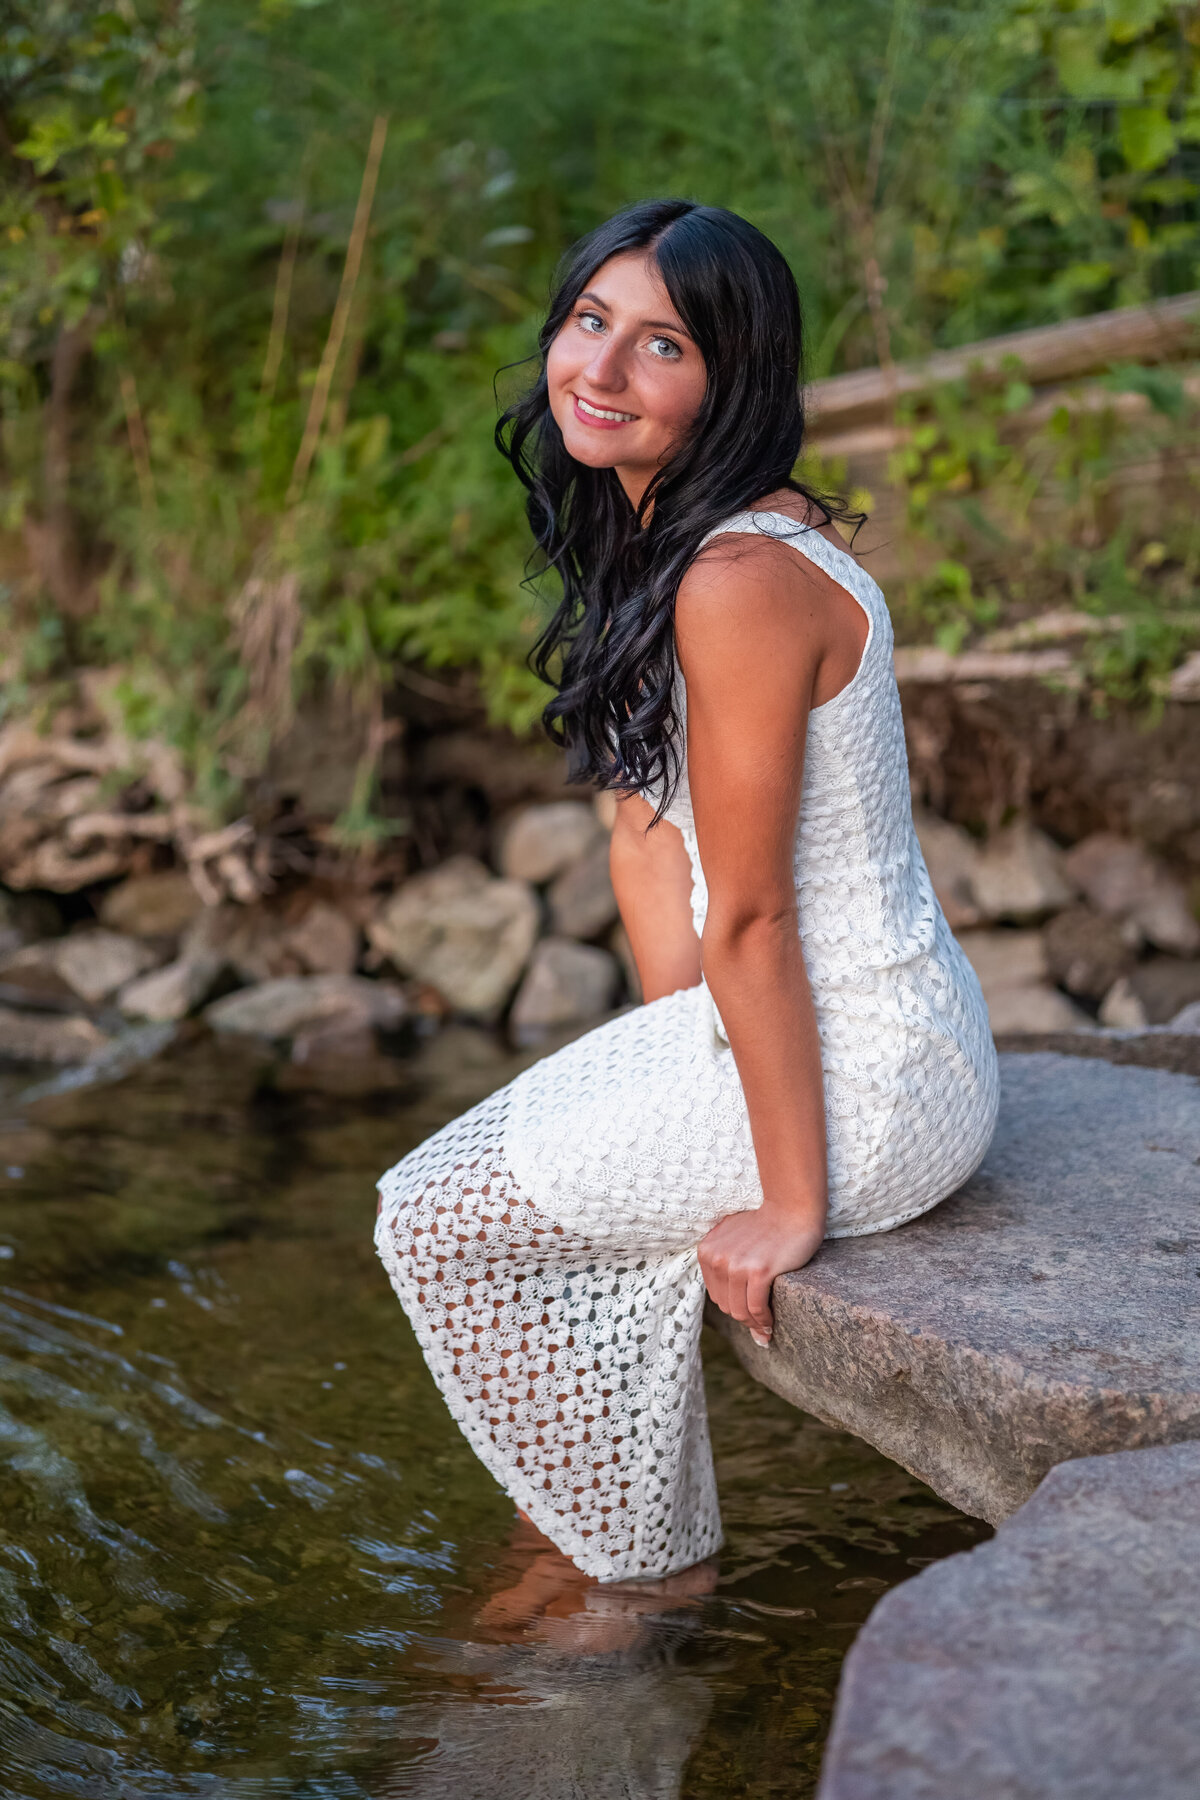 A female high school senior is sitting the edge of a rock dangling her feet into a body of water.  She is looking over her left shoulder looking at the camera and is wearing a long white dress